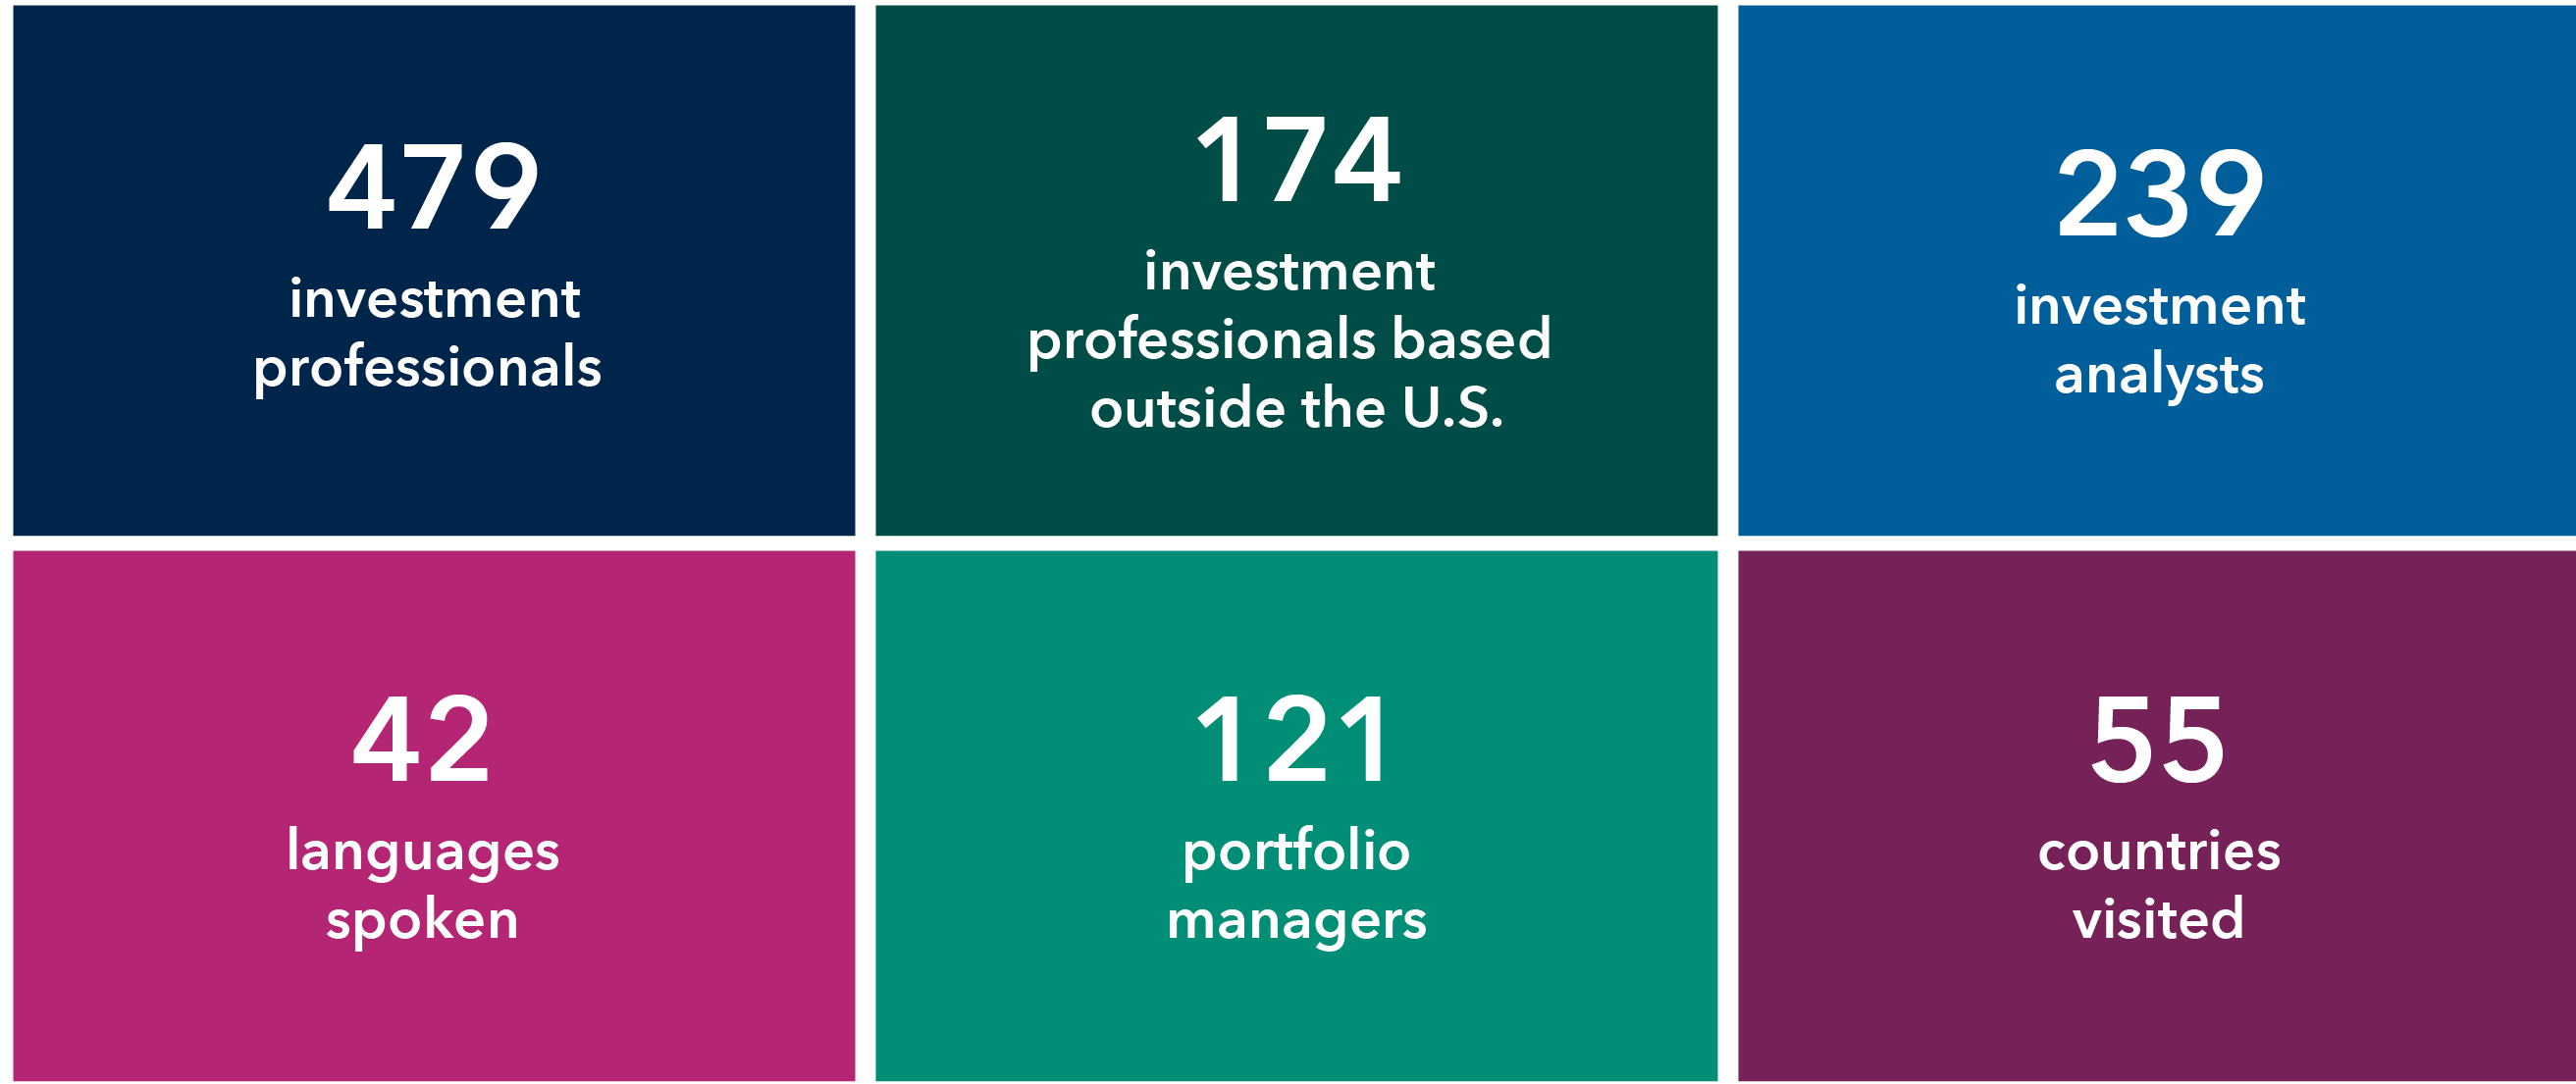 This graphic is called "Capital Group by the Numbers" and gives various statistics about our 479 investment professionals as of December 31, 2023. We have 239 investment analysts and 121 portfolio managers. Of the 479 investment professionals, 174 are based outside the U.S. They speak 42 different languages and visited 55 countries.